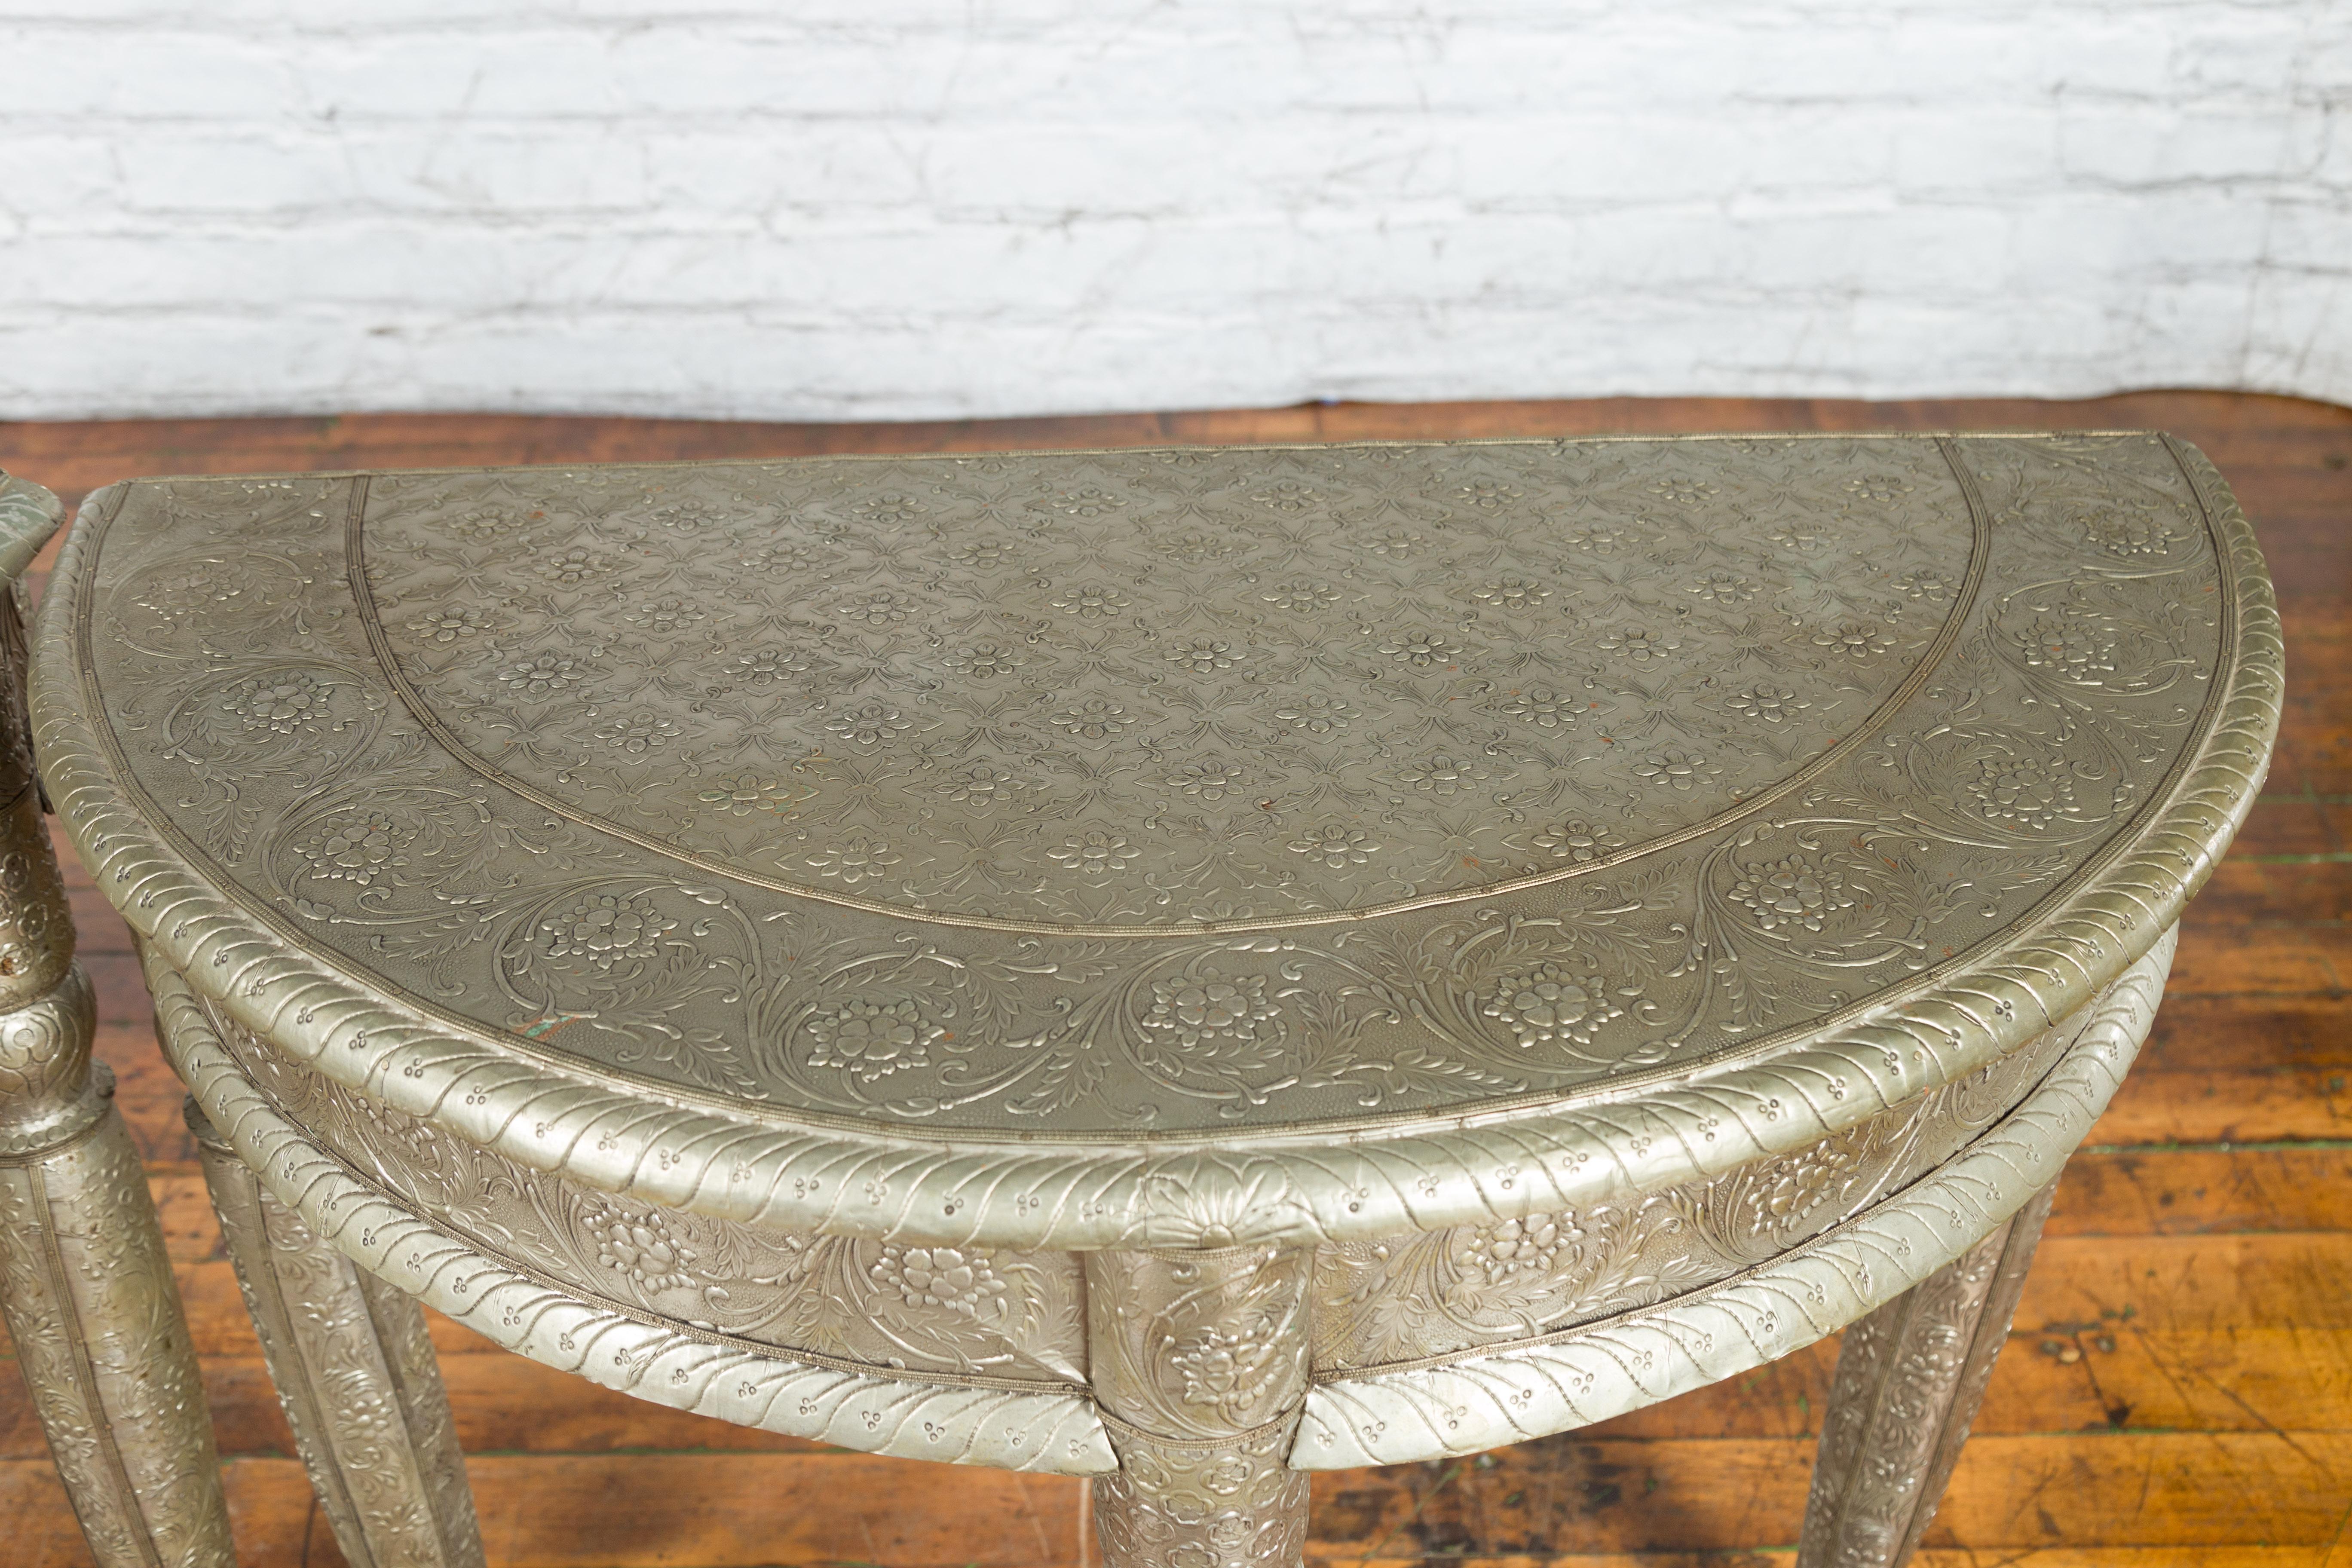 Pair of Indian Metal Sheathing Repoussé Demilune Tables with Floral Arabesques For Sale 4